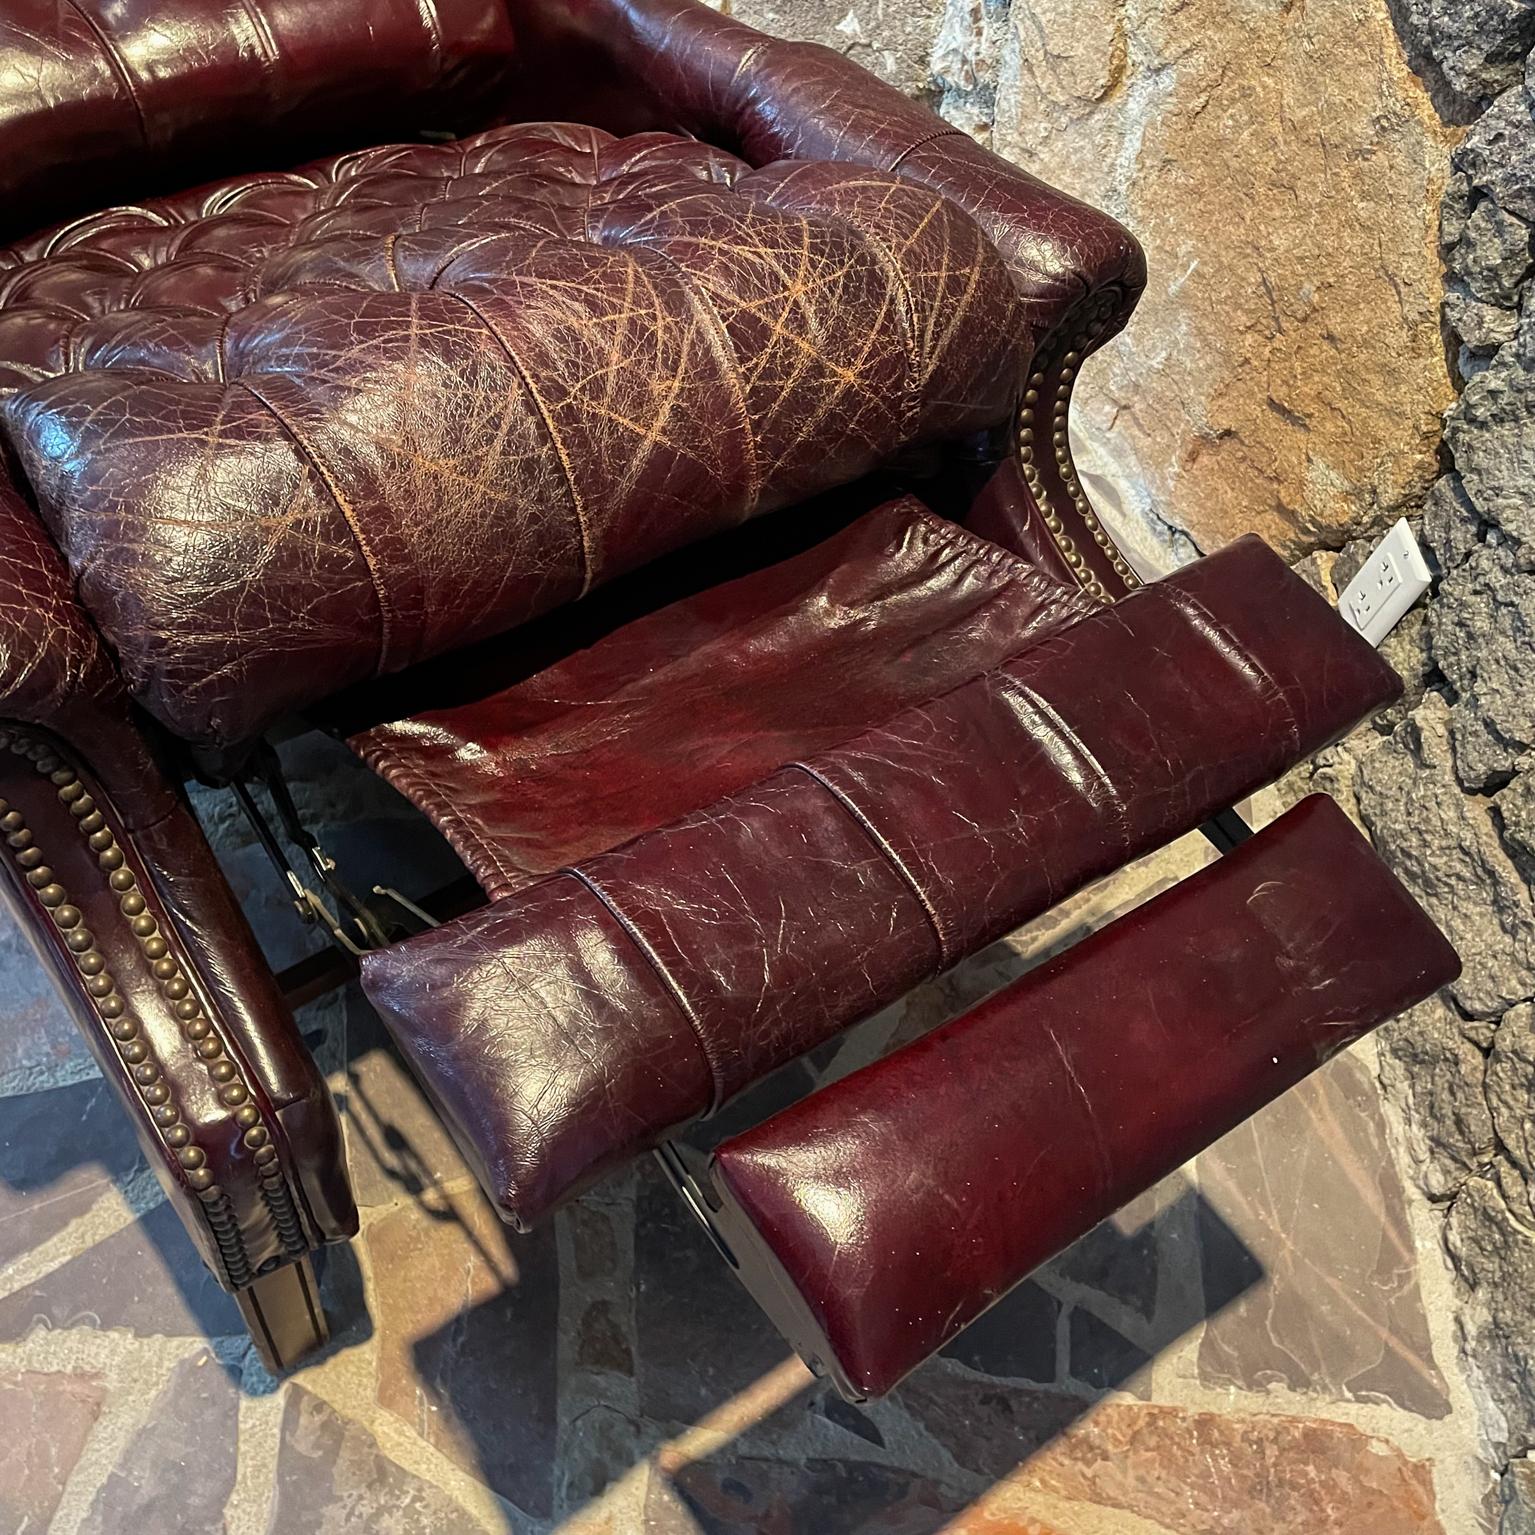 American 1960s Famed Barcalounger Leather Chesterfield Recliner North Carolina